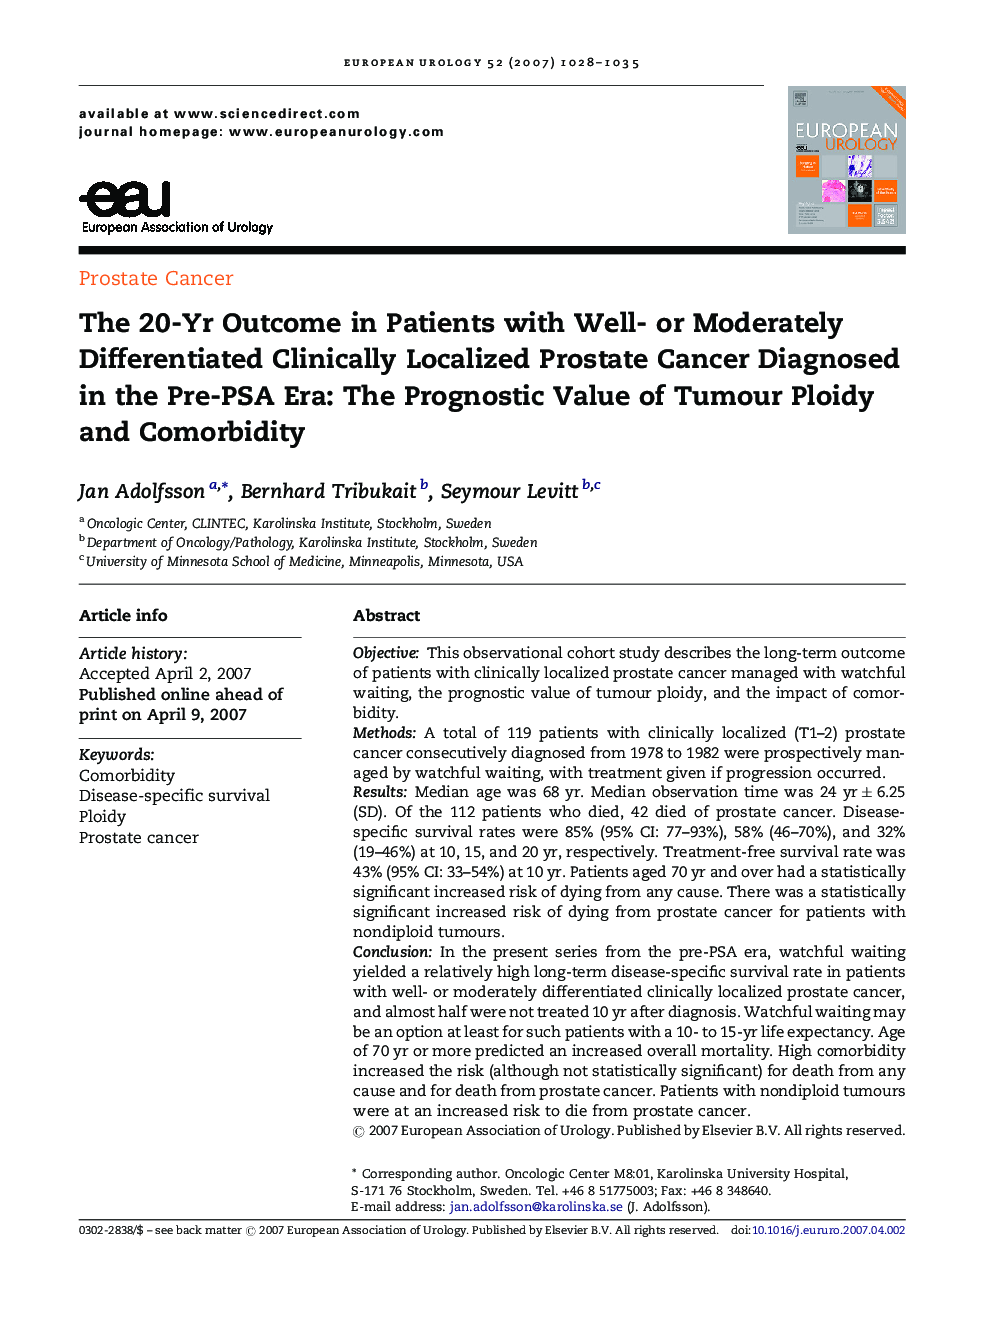 The 20-Yr Outcome in Patients with Well- or Moderately Differentiated Clinically Localized Prostate Cancer Diagnosed in the Pre-PSA Era: The Prognostic Value of Tumour Ploidy and Comorbidity